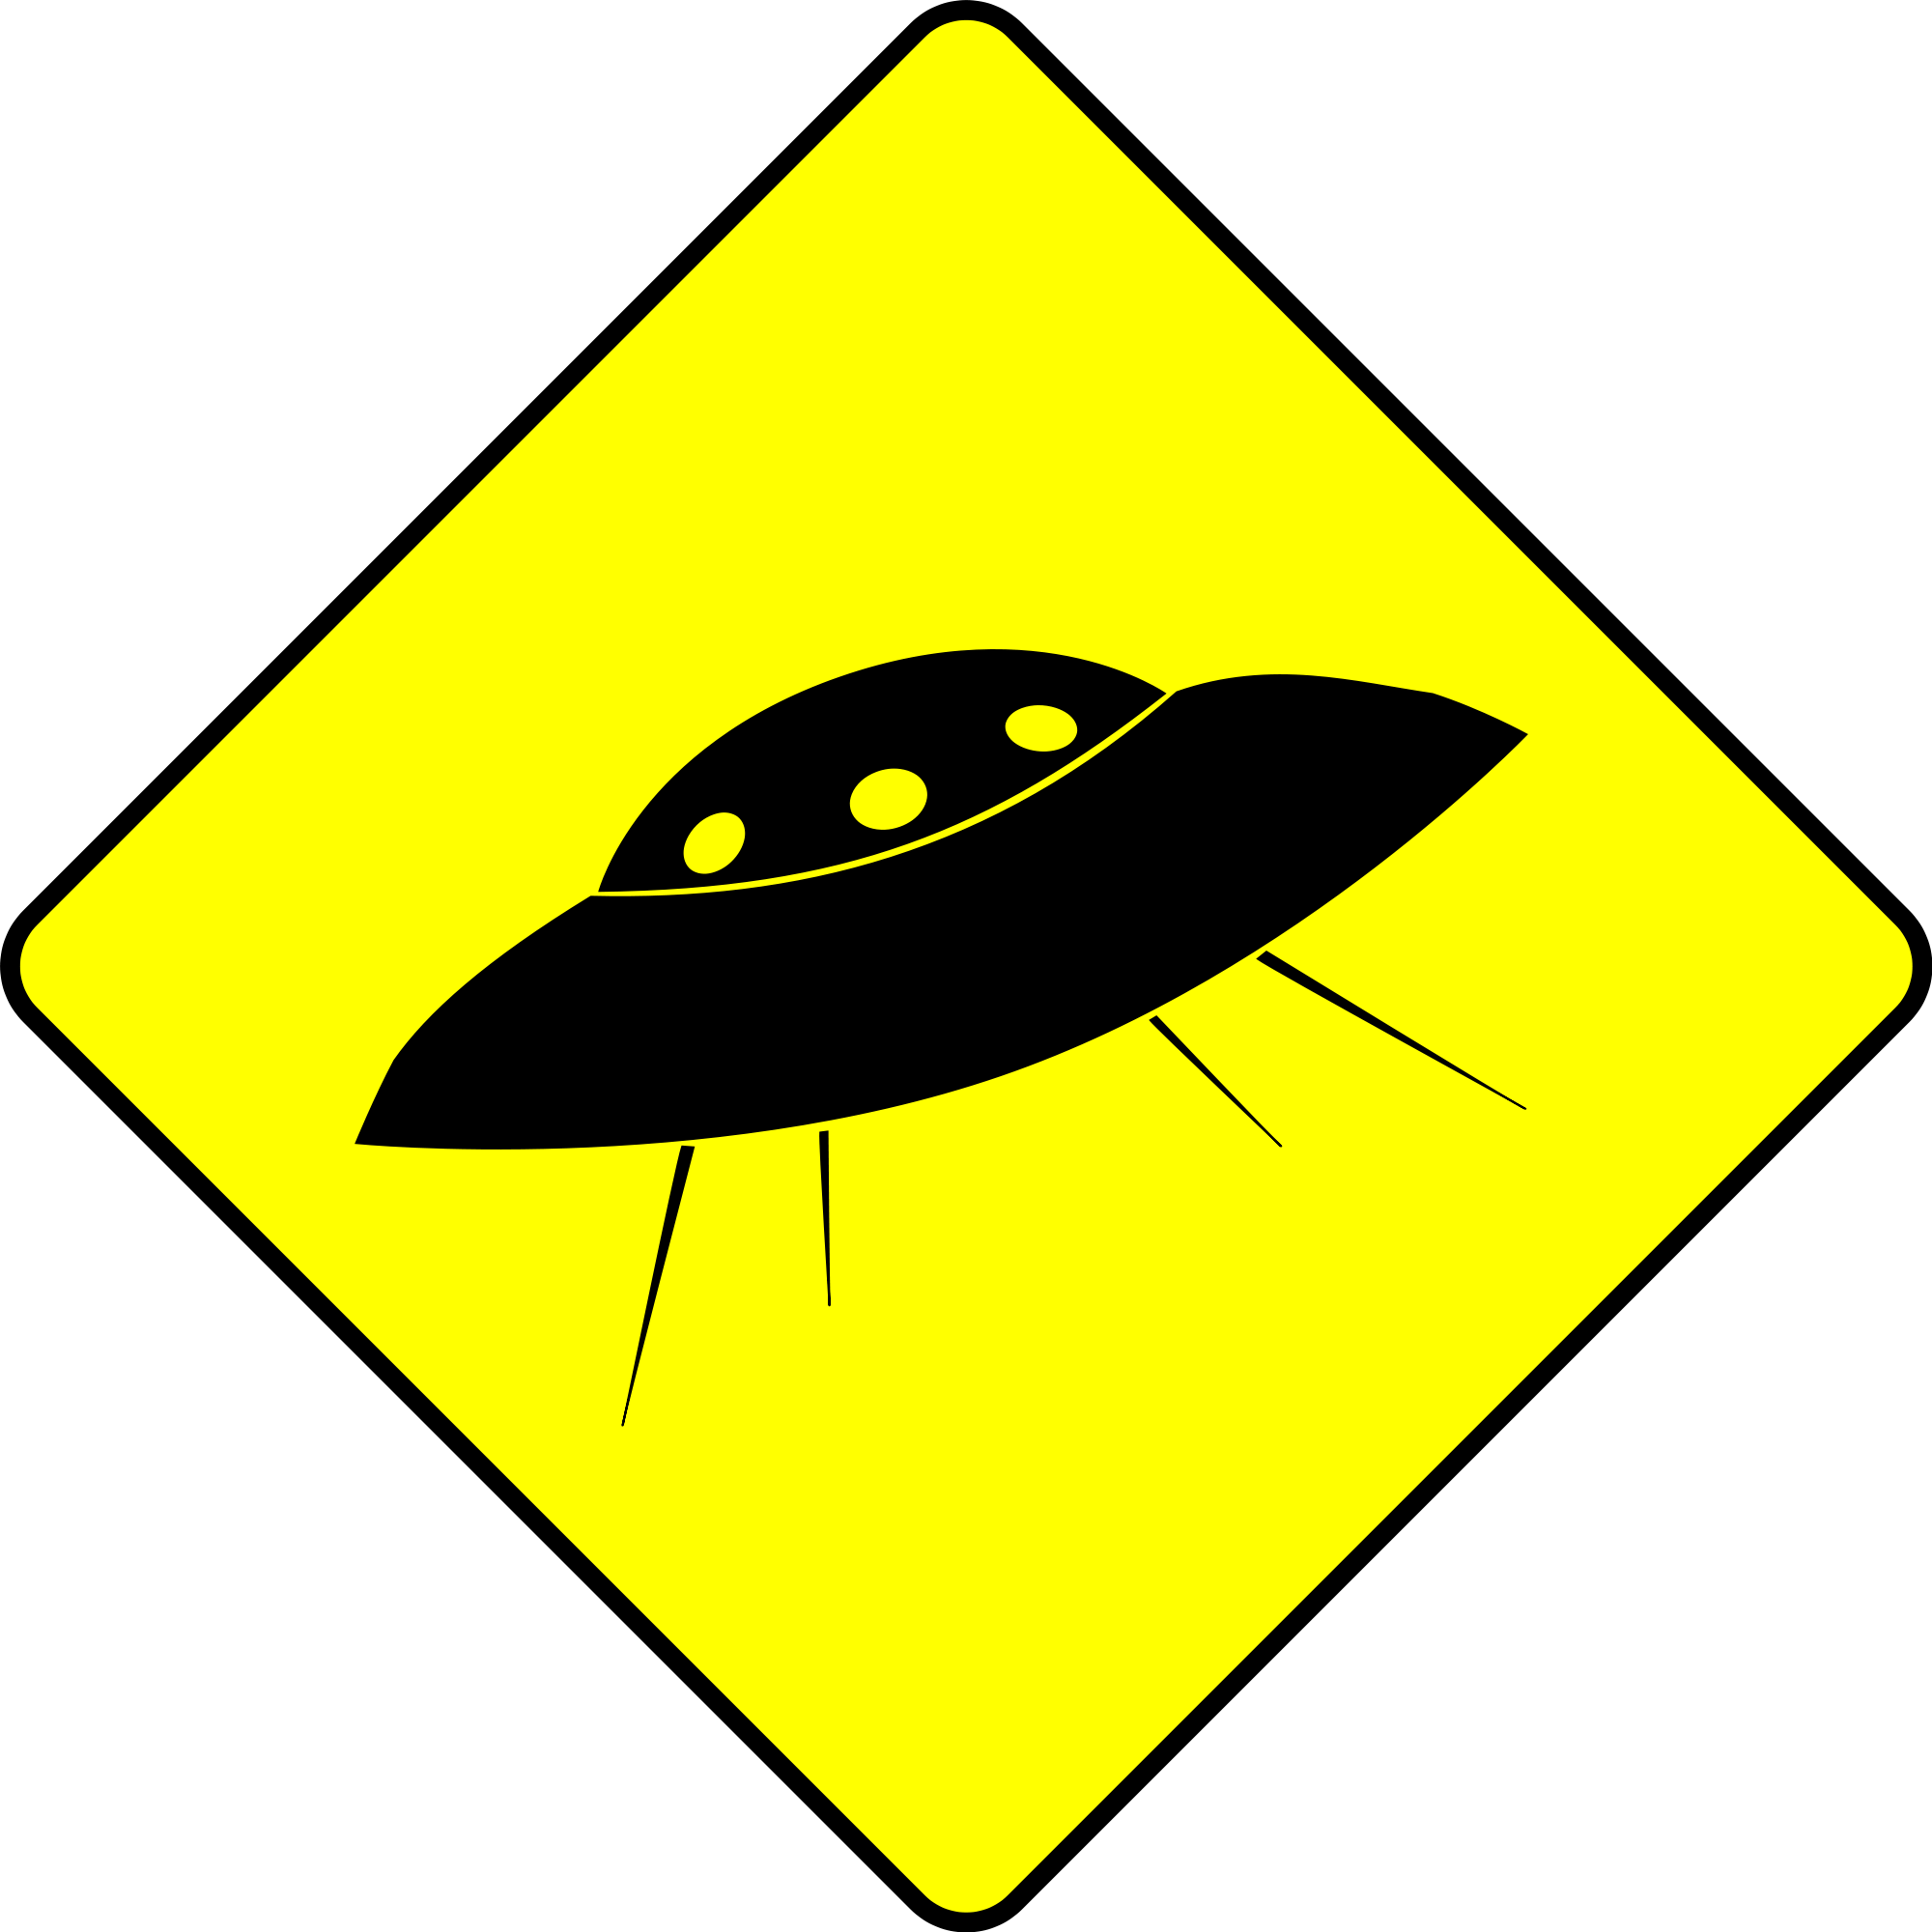 Ufo clipart svg. File caution wikimedia commons